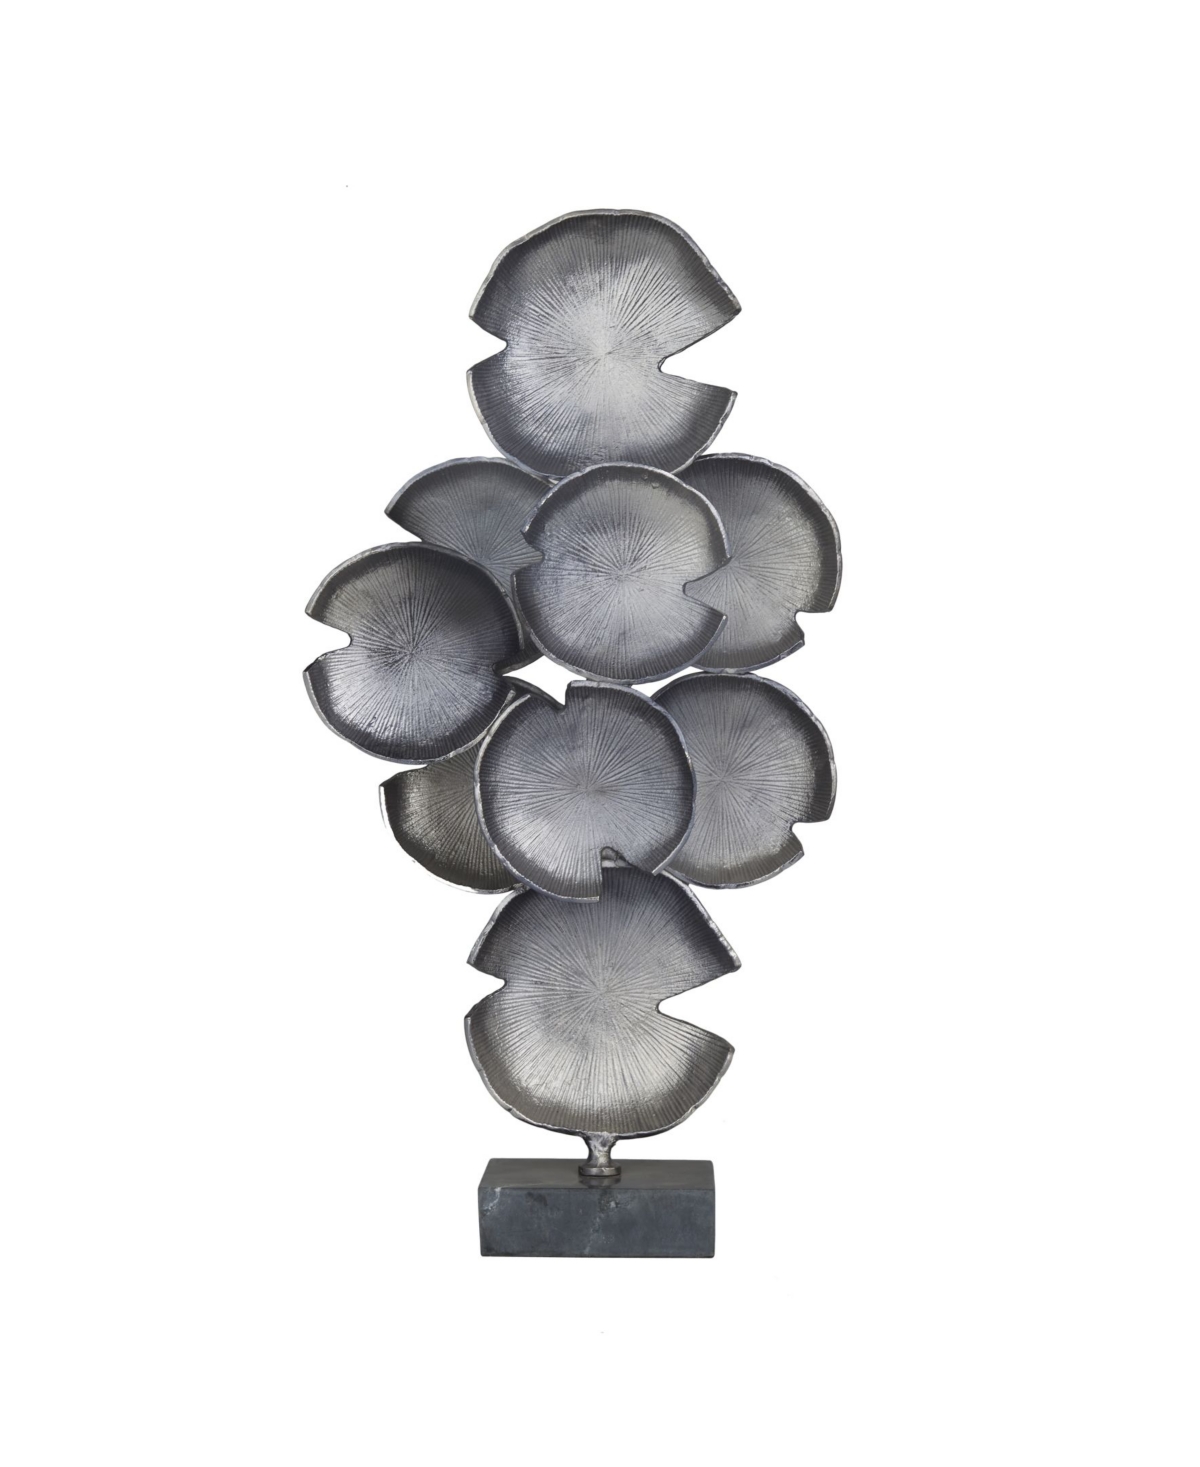 Rosemary Lane Contemporary Sculpture, 32" X 16" In Gray